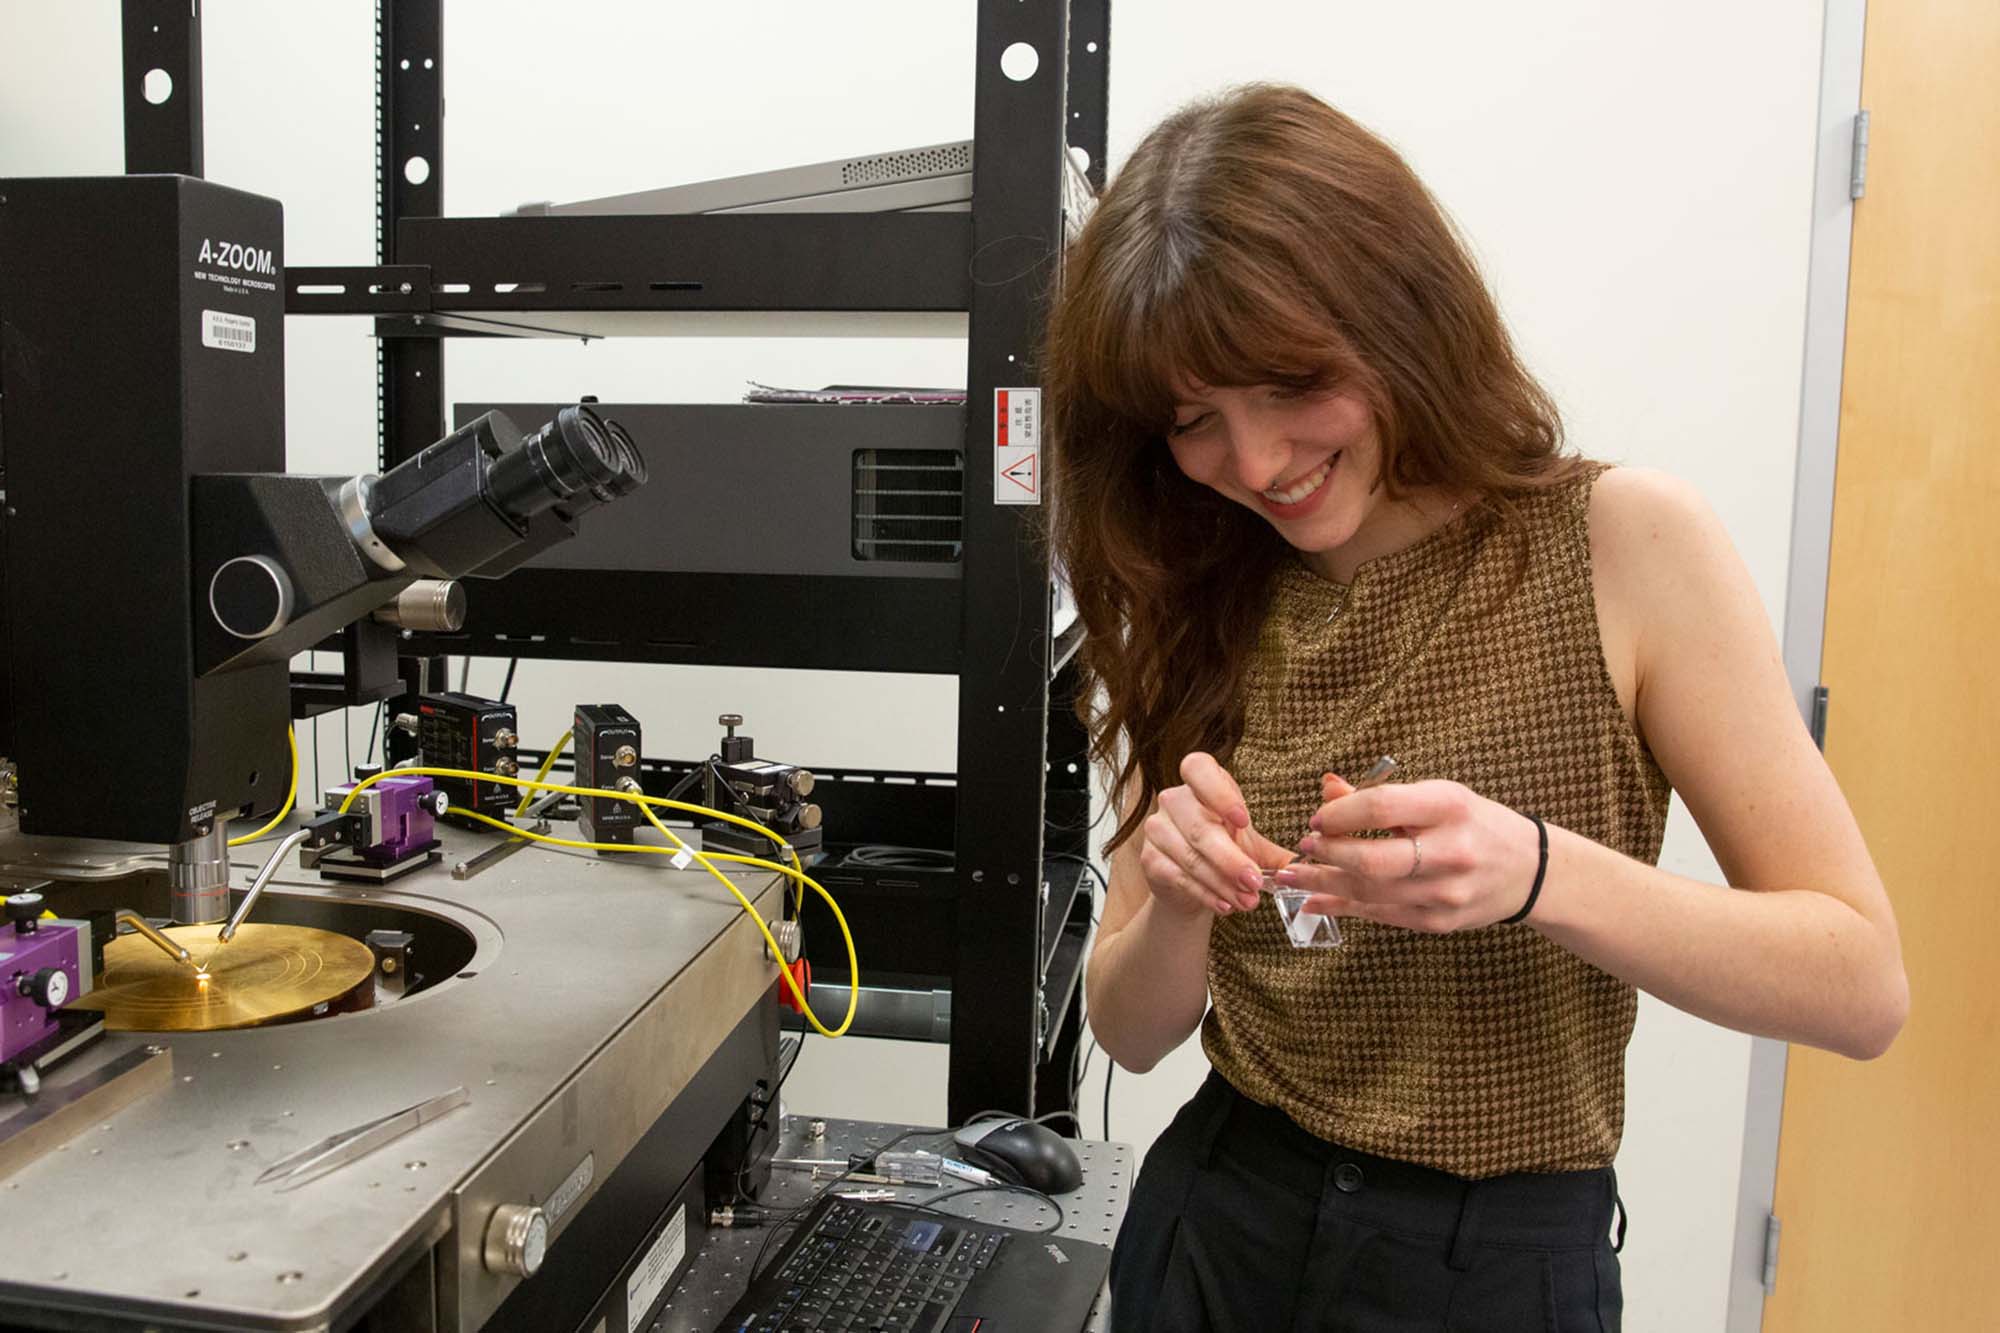 Hailey Warner, an electrical engineering student at Fulton Schools standing beside research equipment, working on a semiconductor-related project.